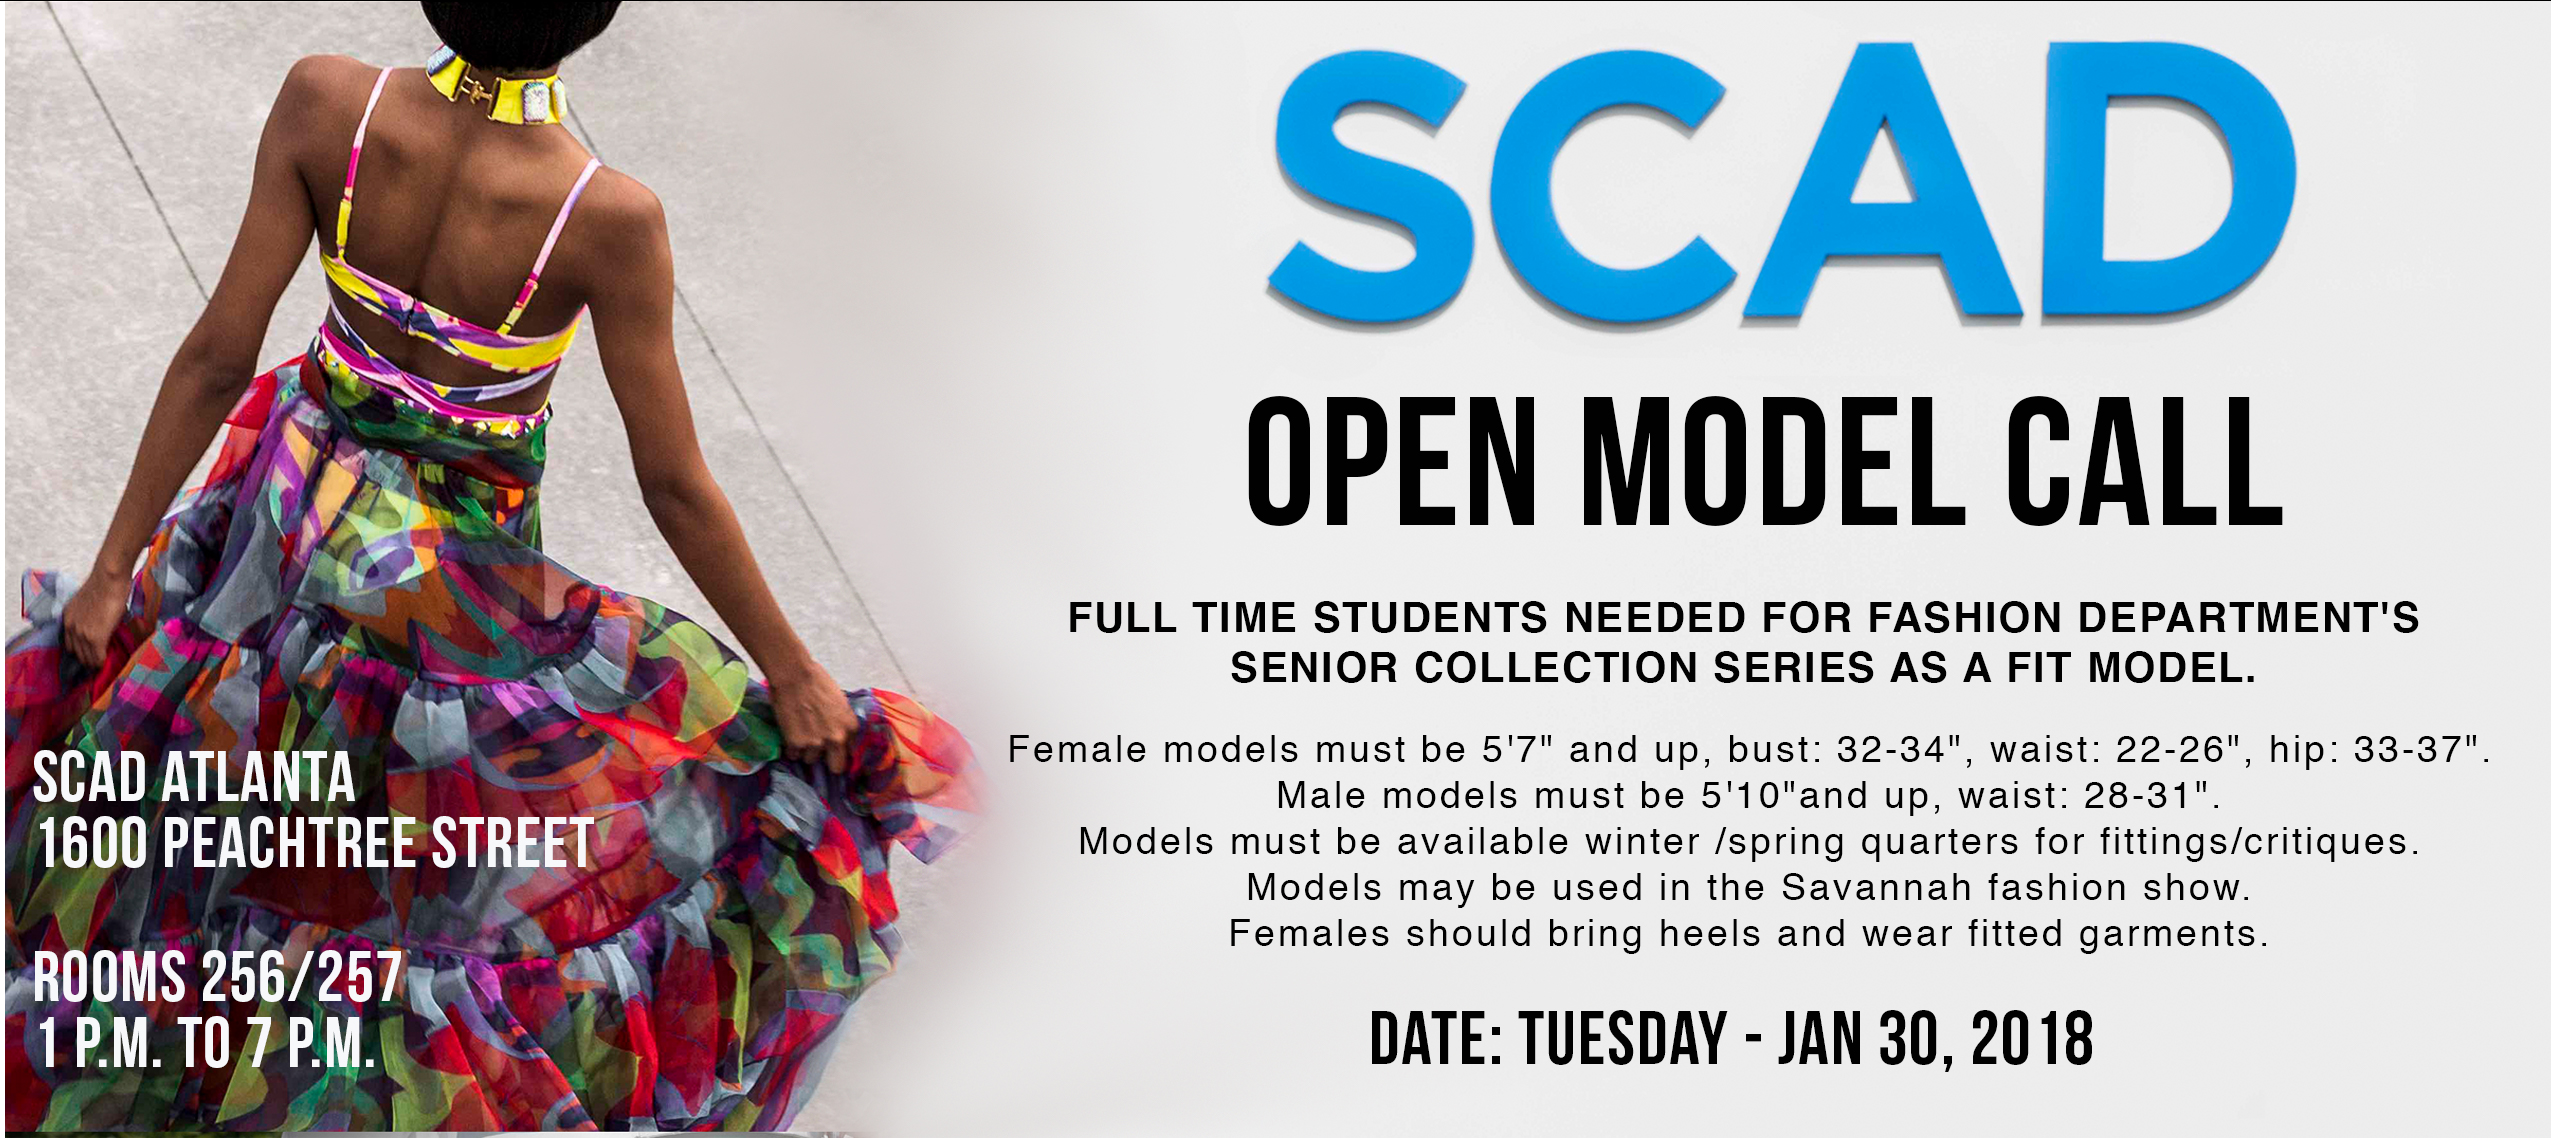 Rock the runway by modeling for SCADâ€™s spring fashion show